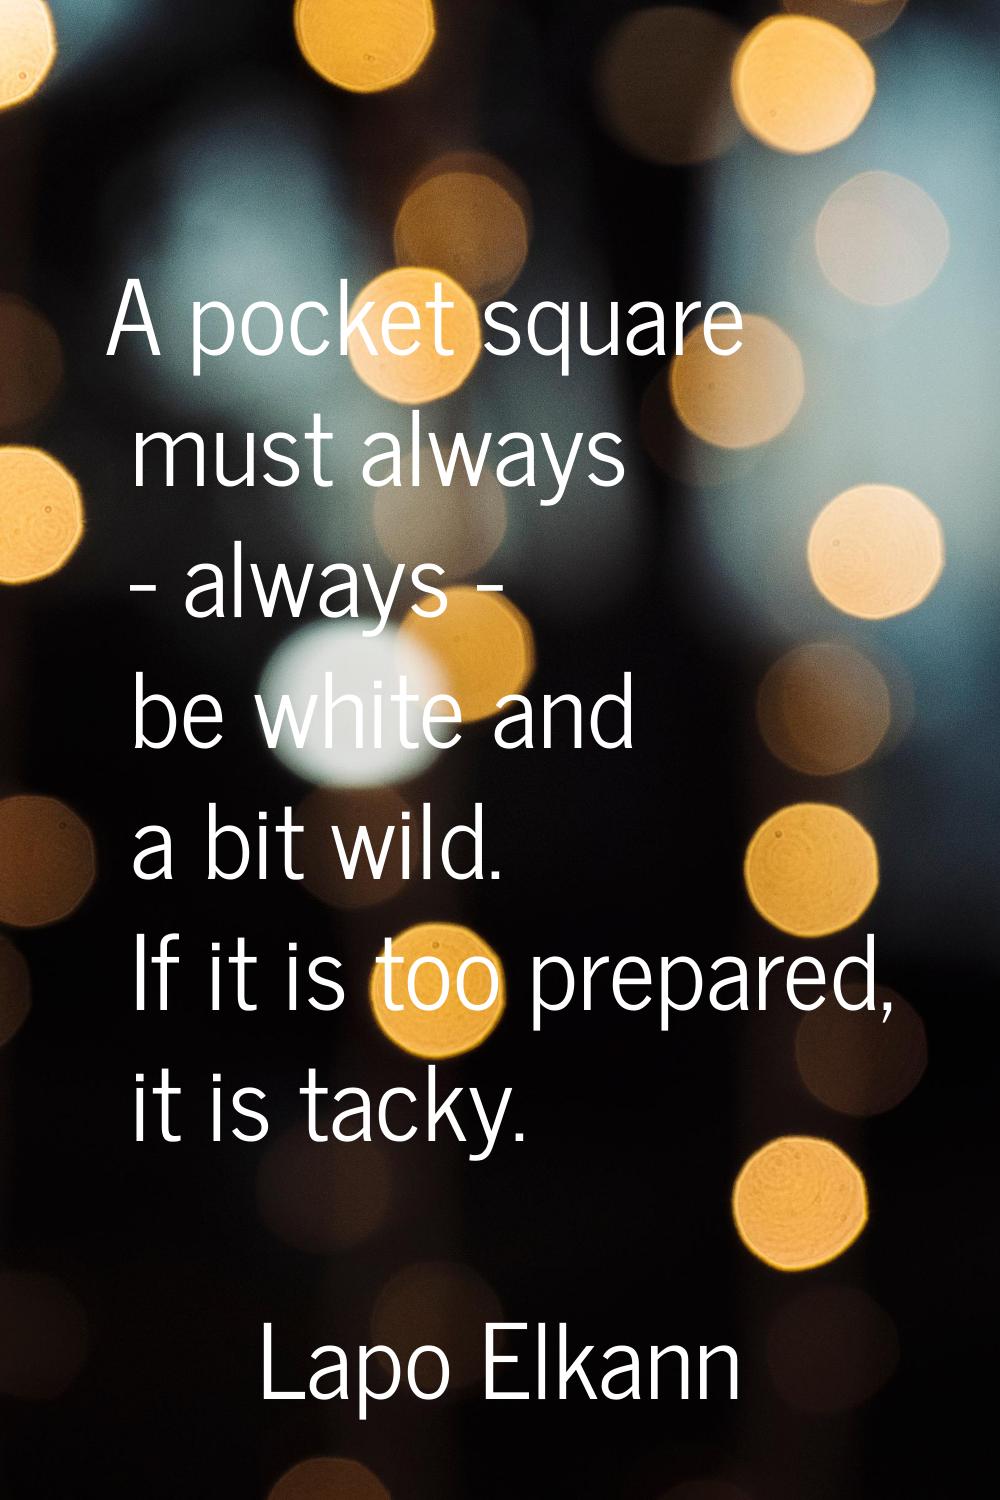 A pocket square must always - always - be white and a bit wild. If it is too prepared, it is tacky.